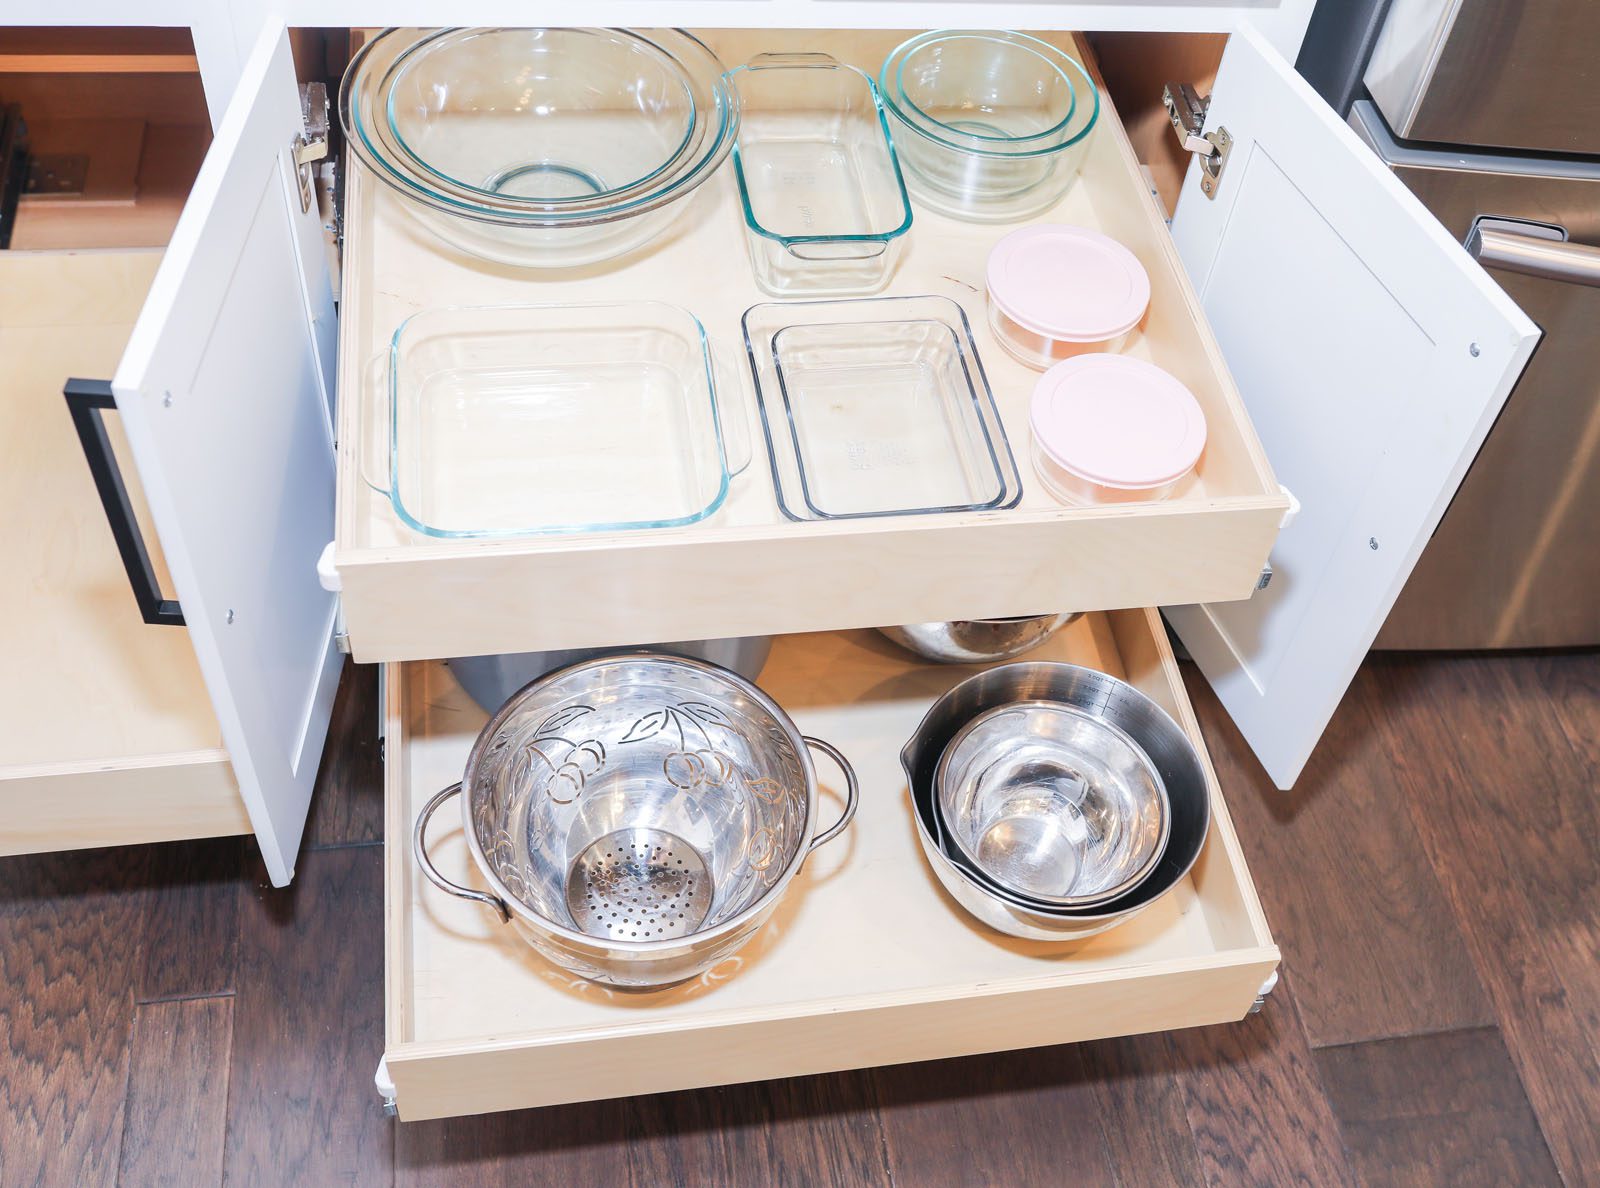 Made-To-Fit Slide-out Shelves for Existing Cabinets by Slide-A